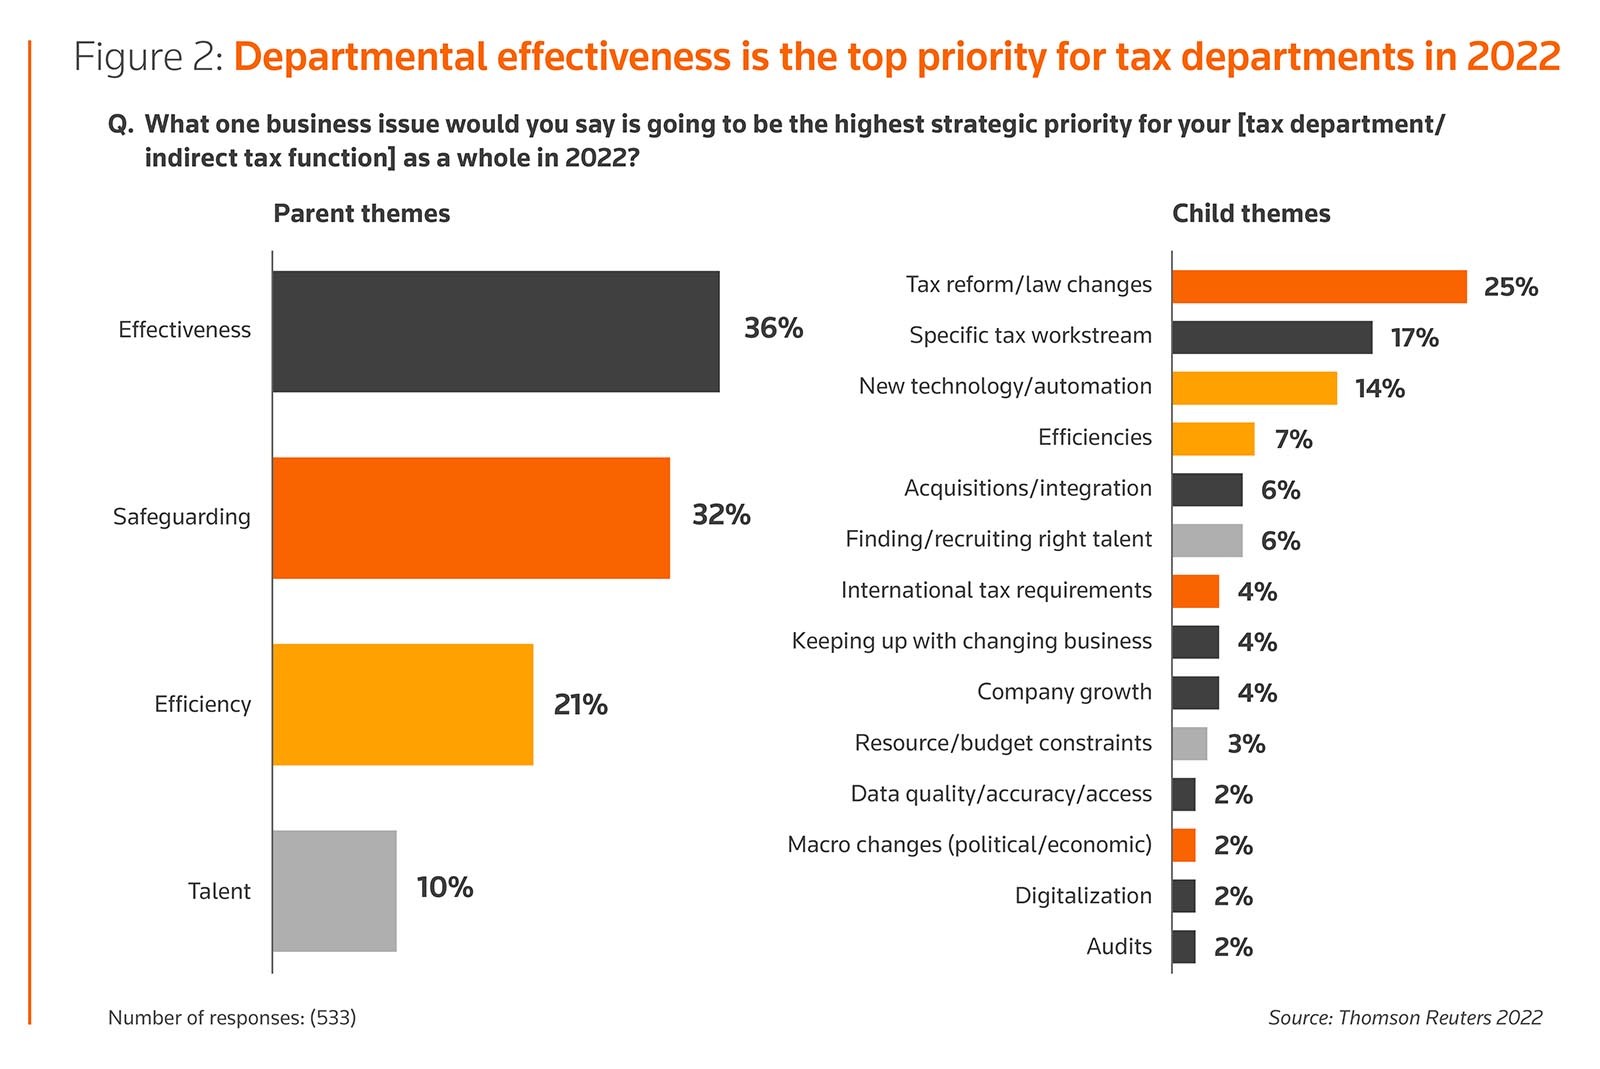 Figure 2: Departmental effectiveness is the top priority for tax departments in 2022